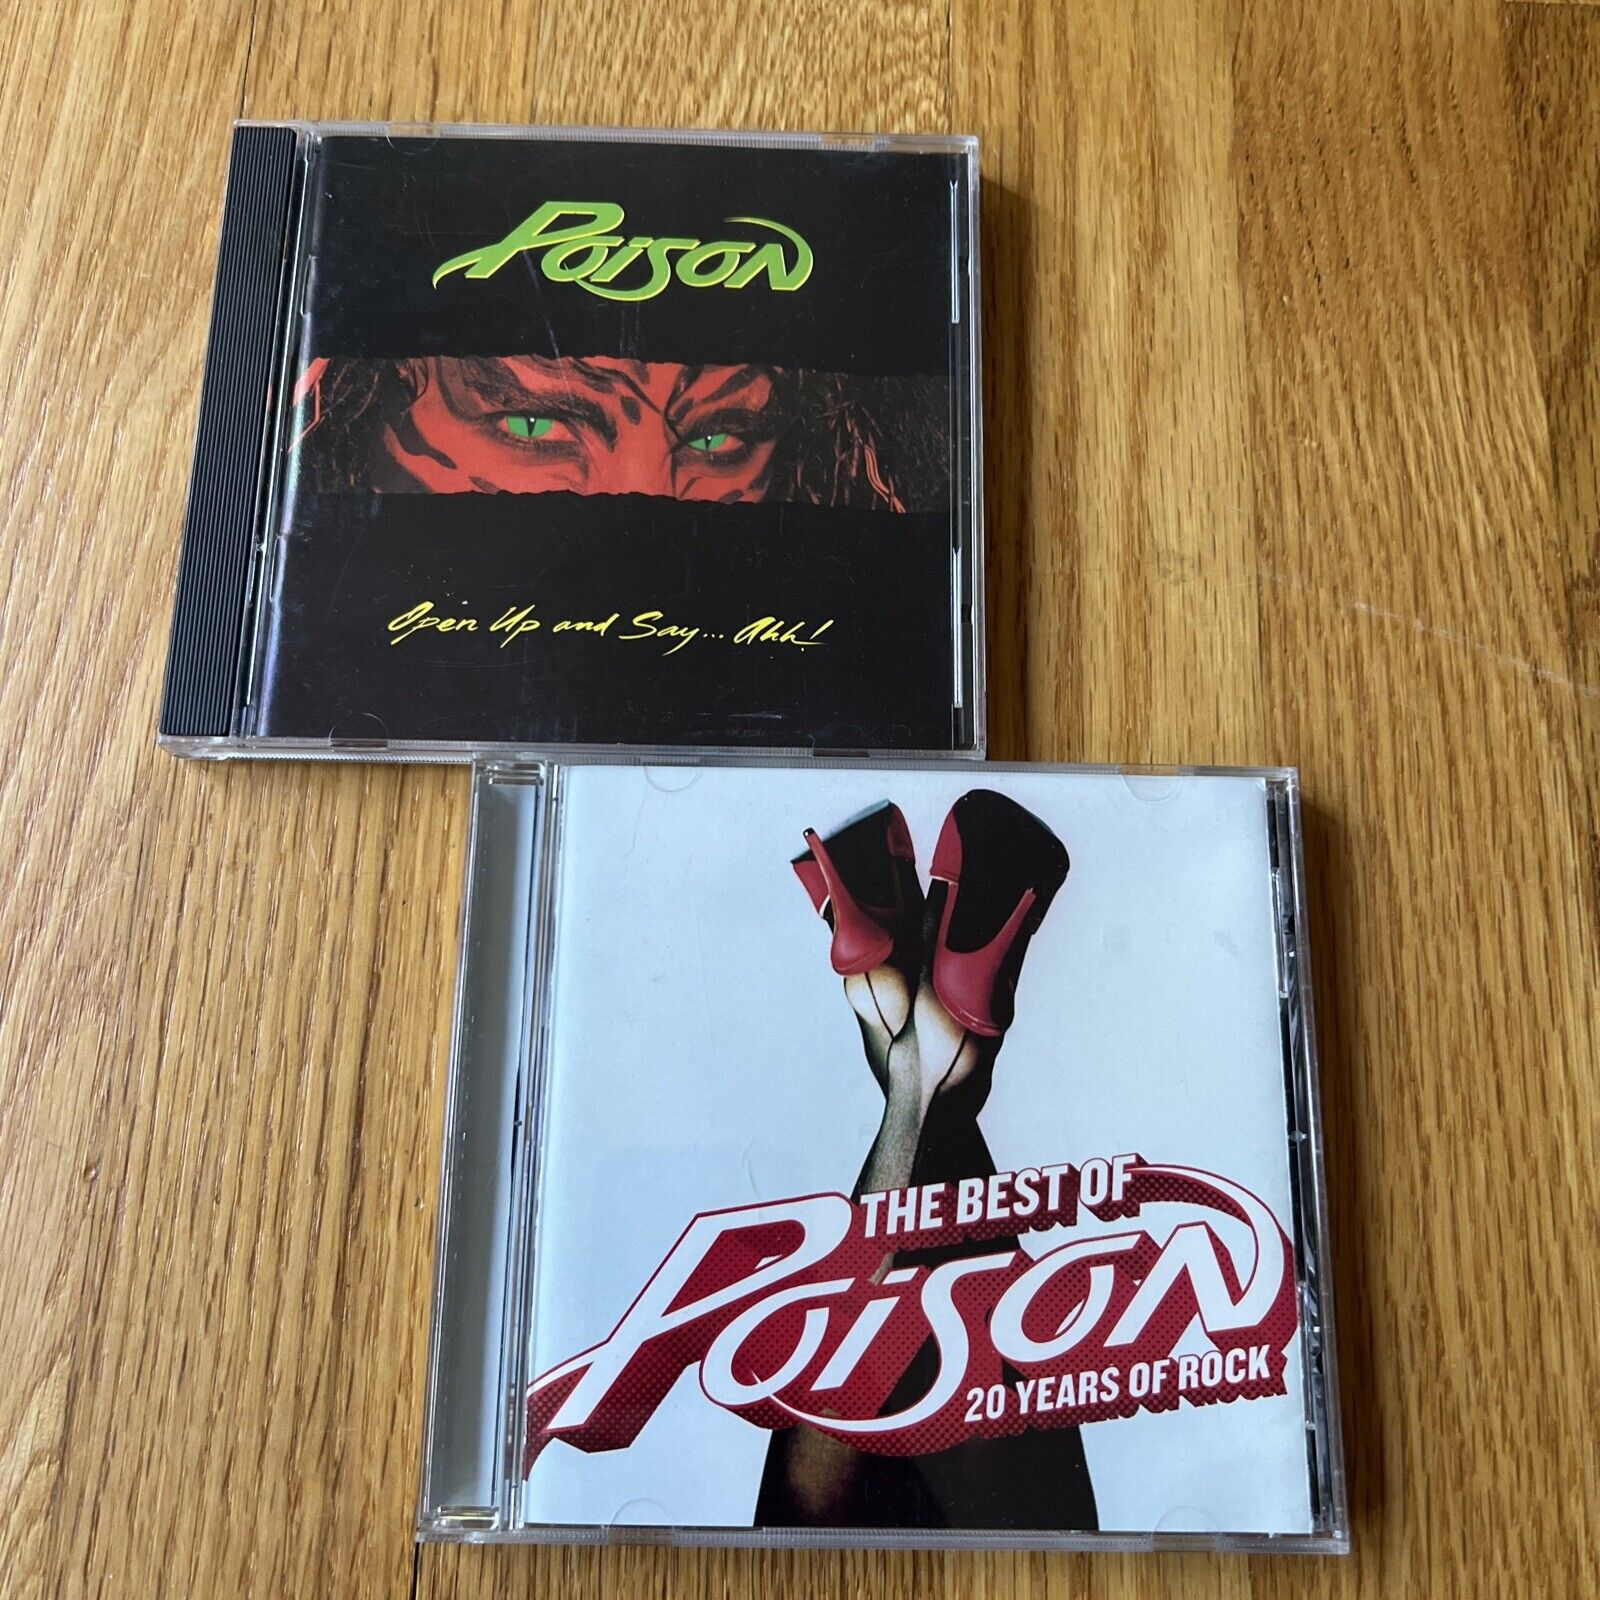 POISON 2 CD Lot “Open Up and Say…Ahh!, Best Of” like Cinderella, Skid Row, Tuff.